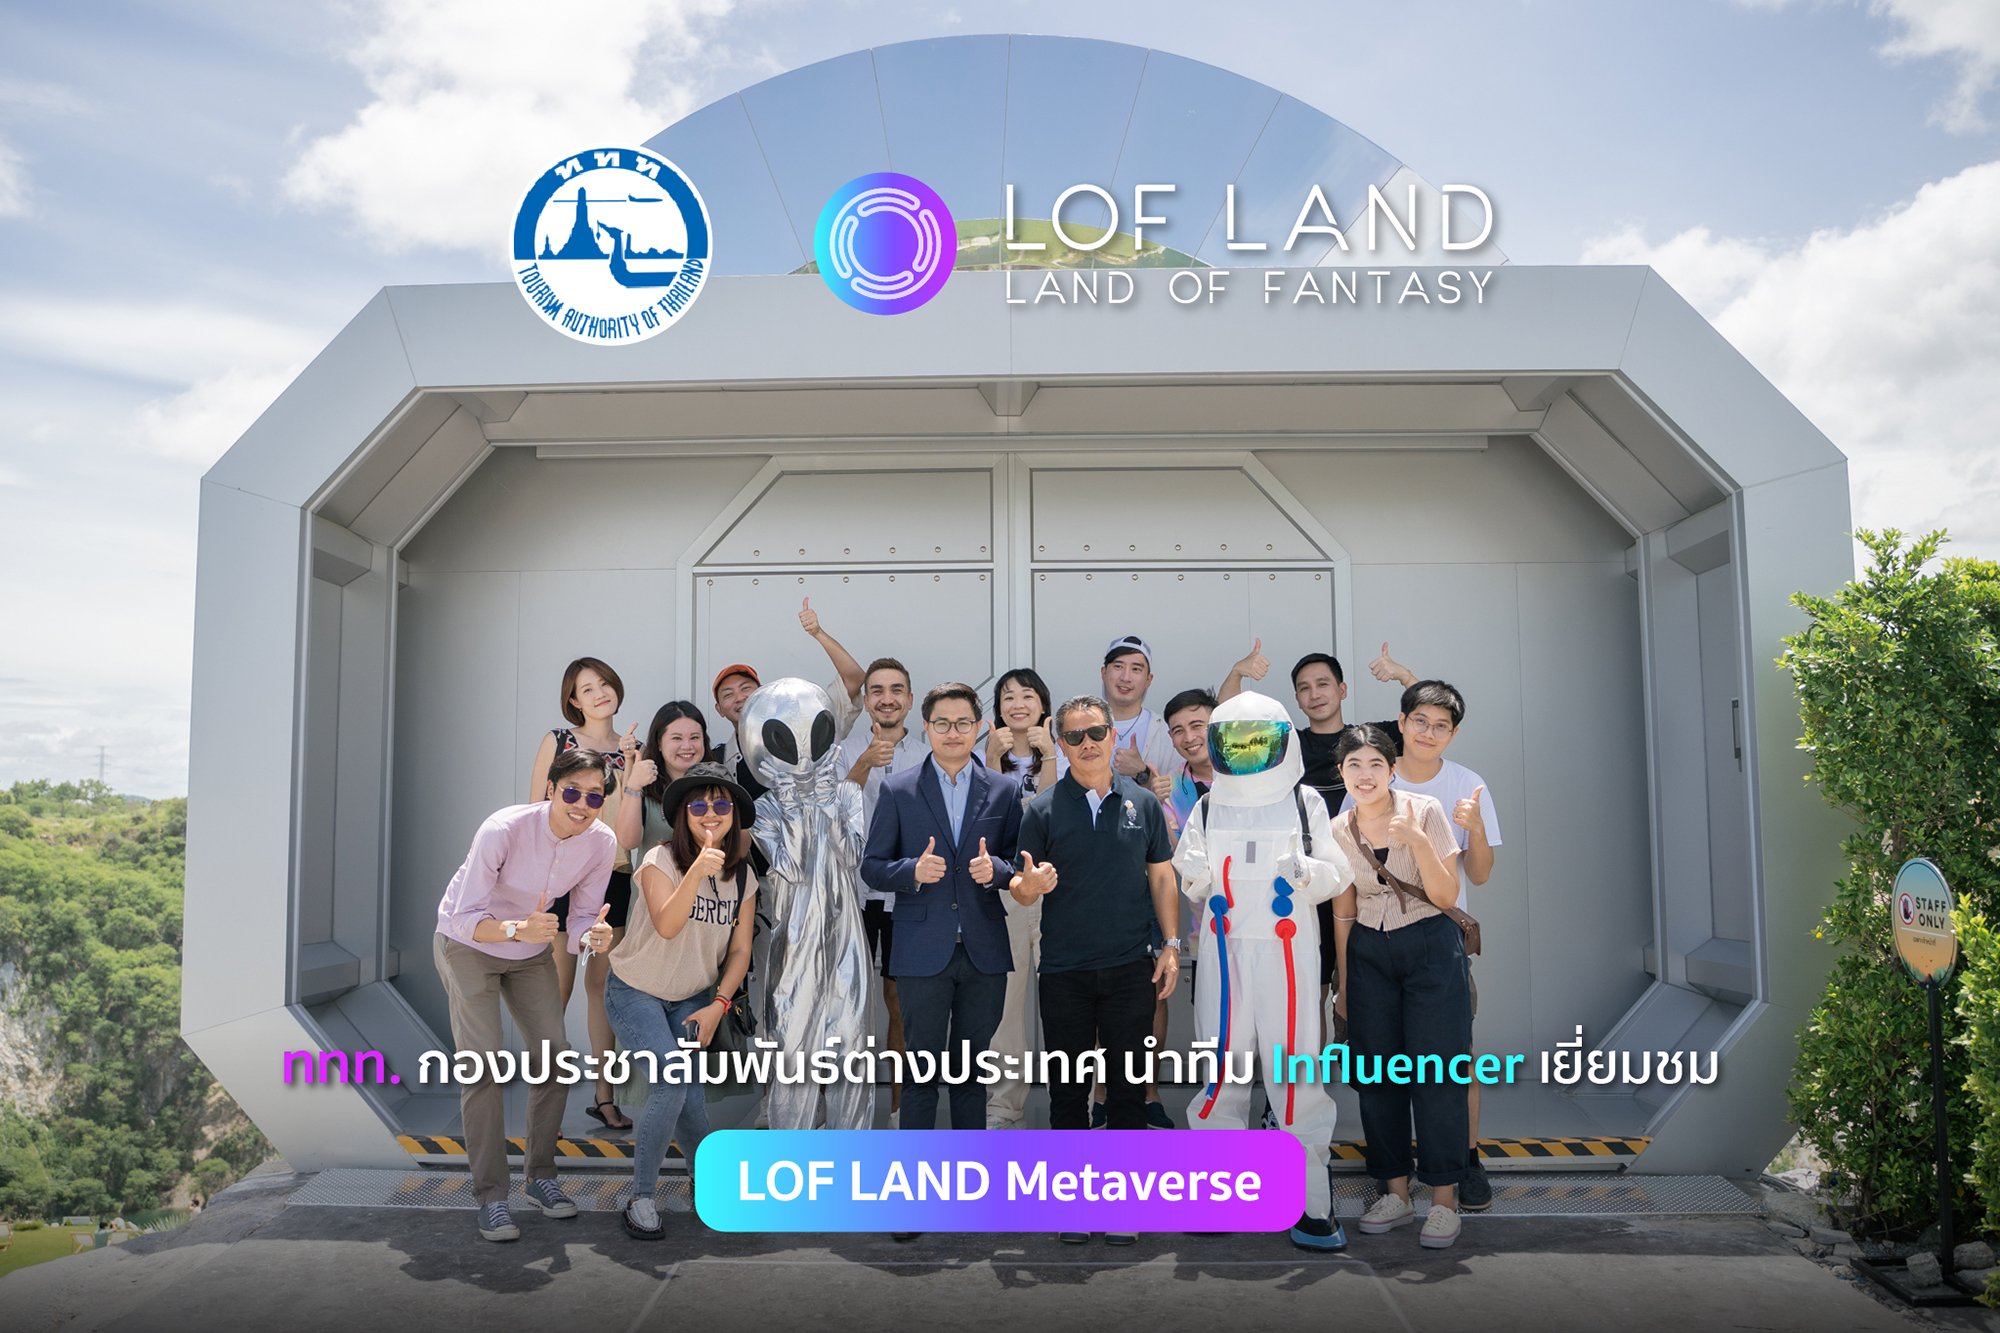 TAT led a team of travel influencers from 13 countries around the world Honor to visit 